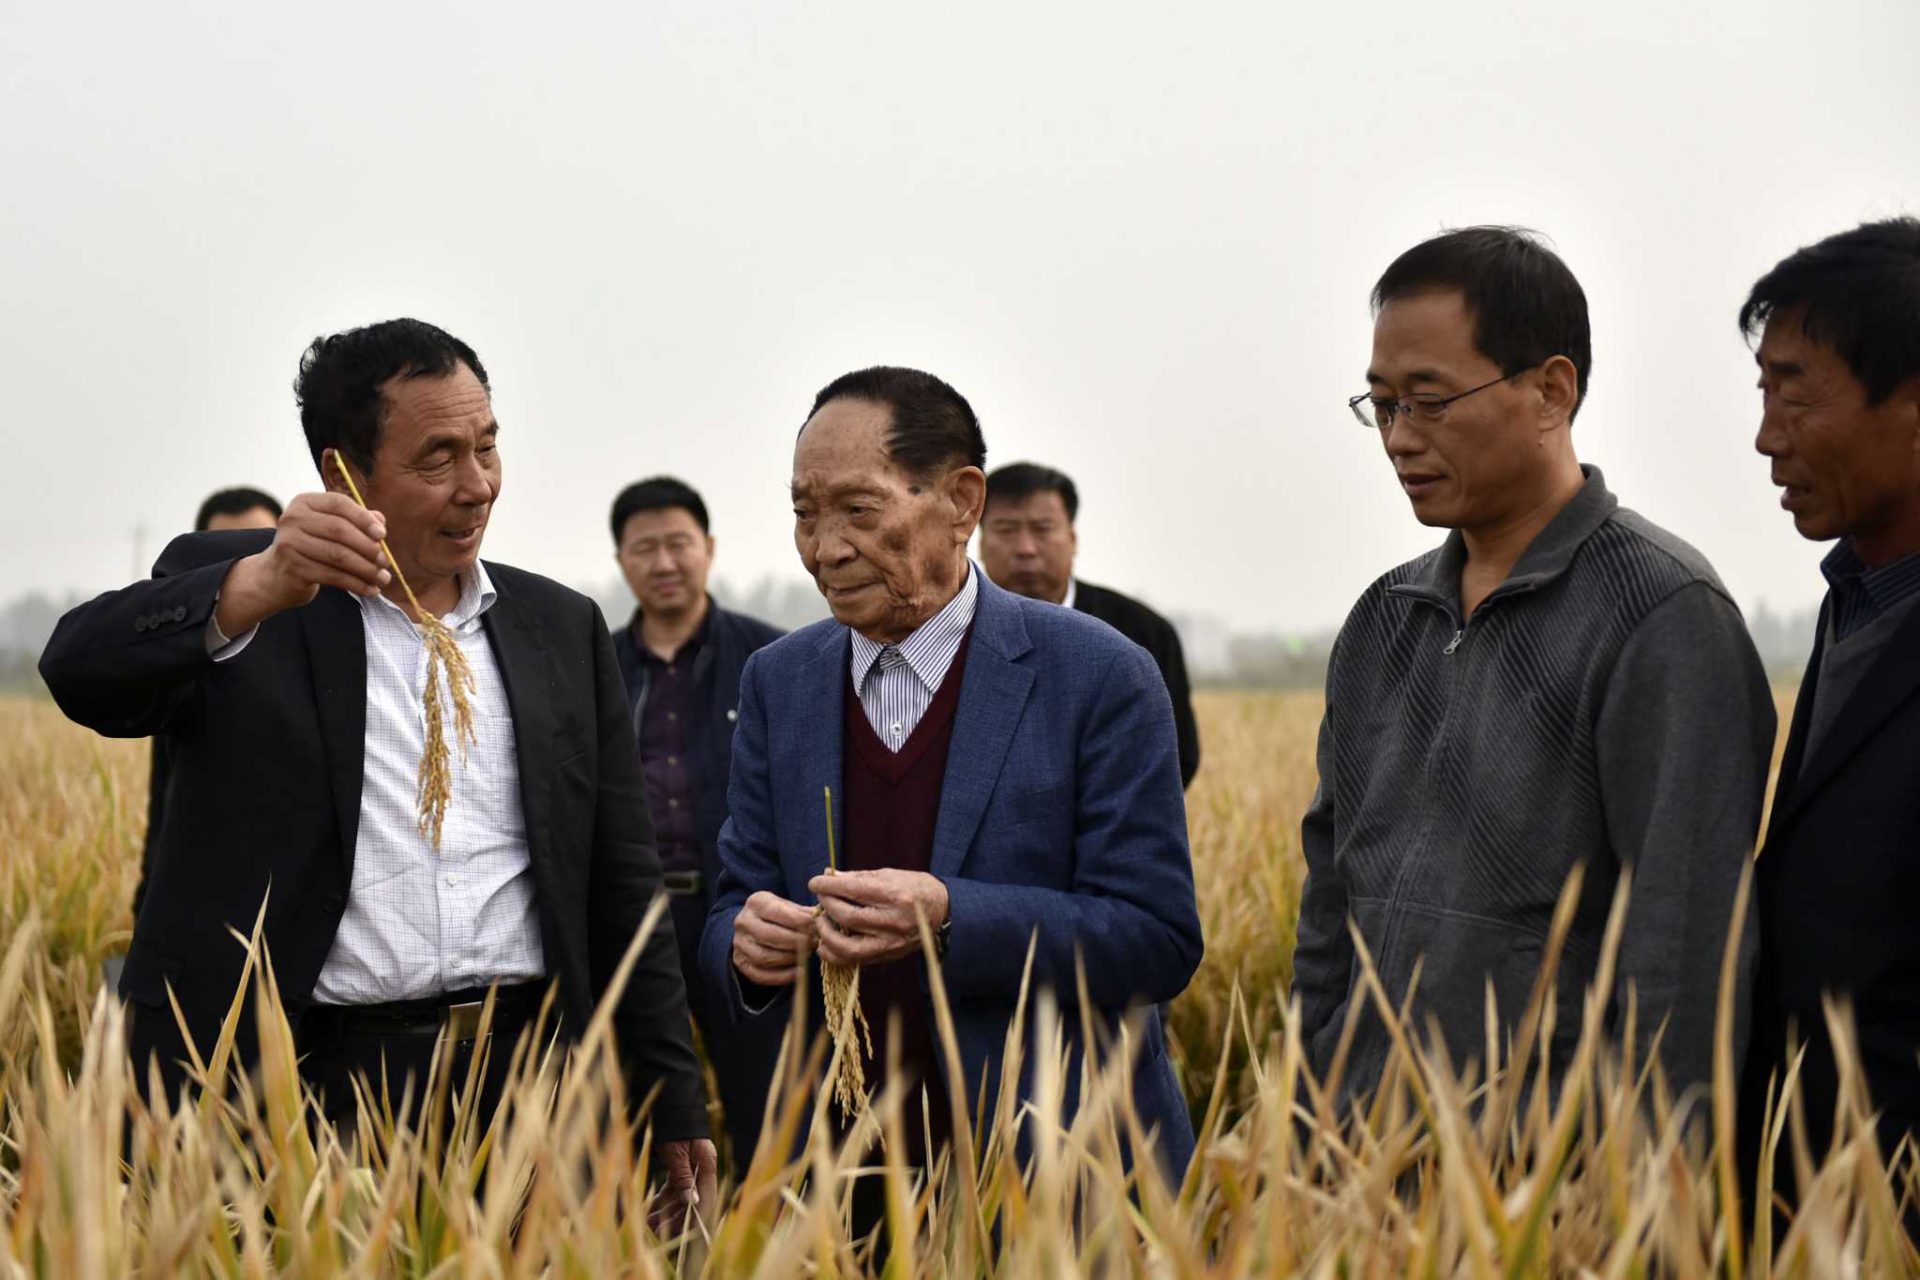 China’s Yuan Longping dies; rice research helped feed world